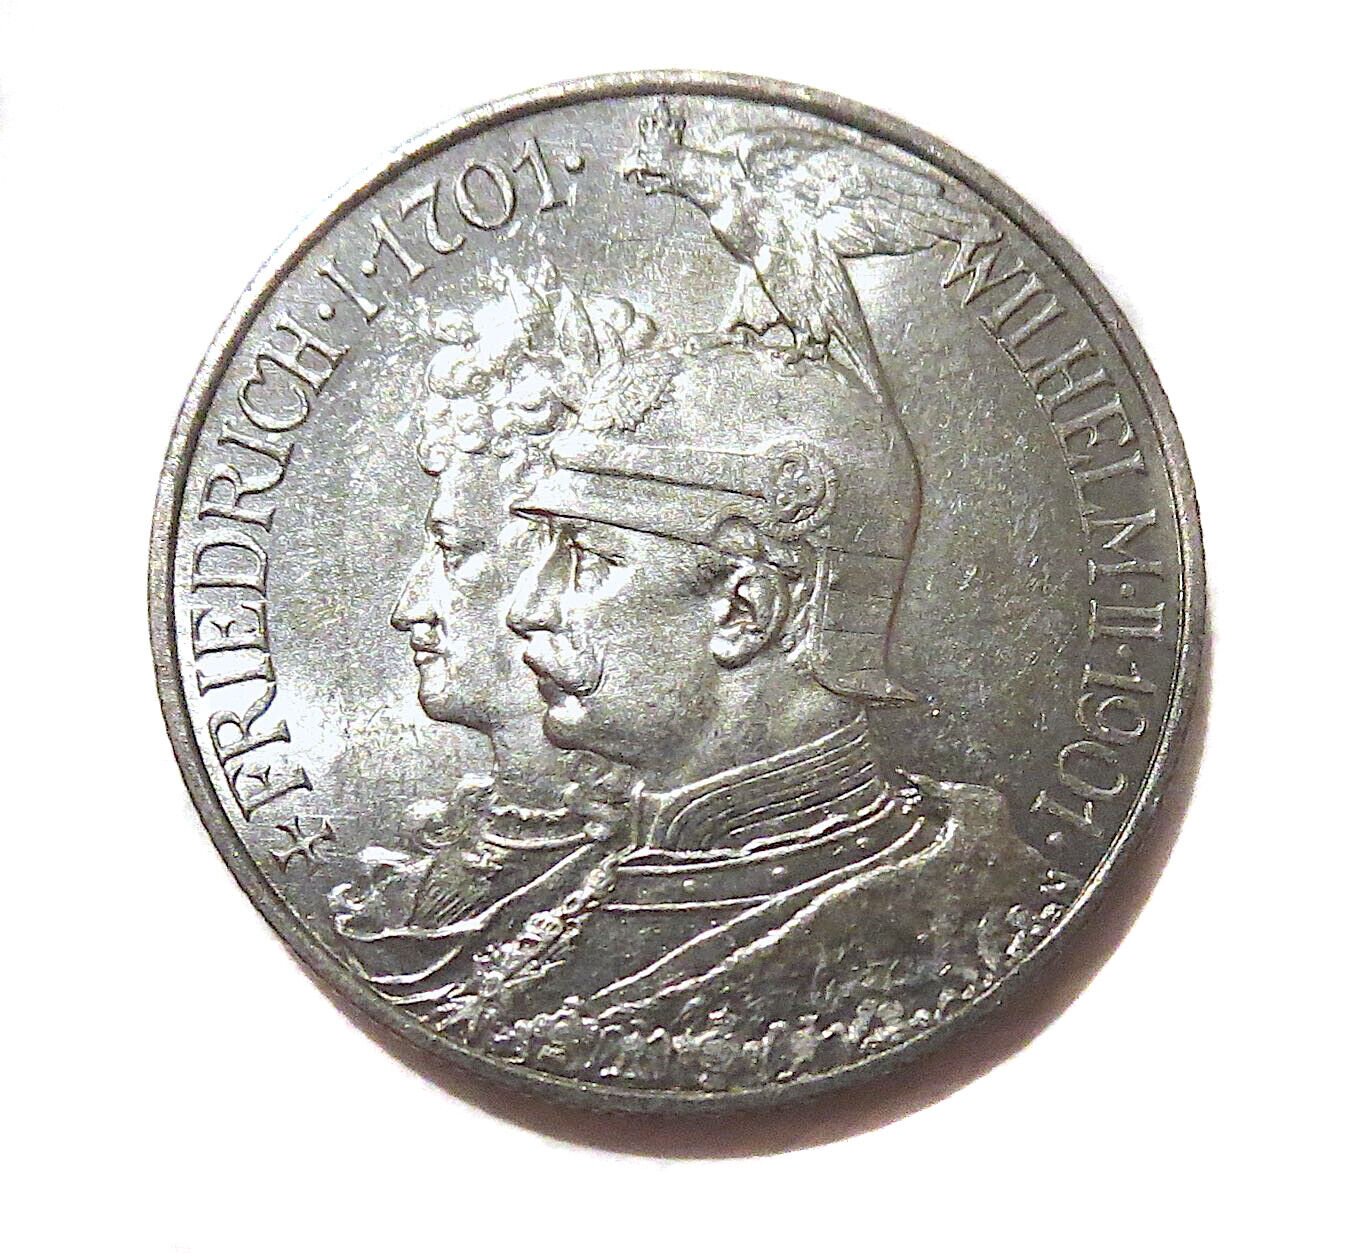 GERMANY-PRUSSIA gift 1901 2 Mark Silver Bicentennial Max 59% OFF UNCIRCULATED